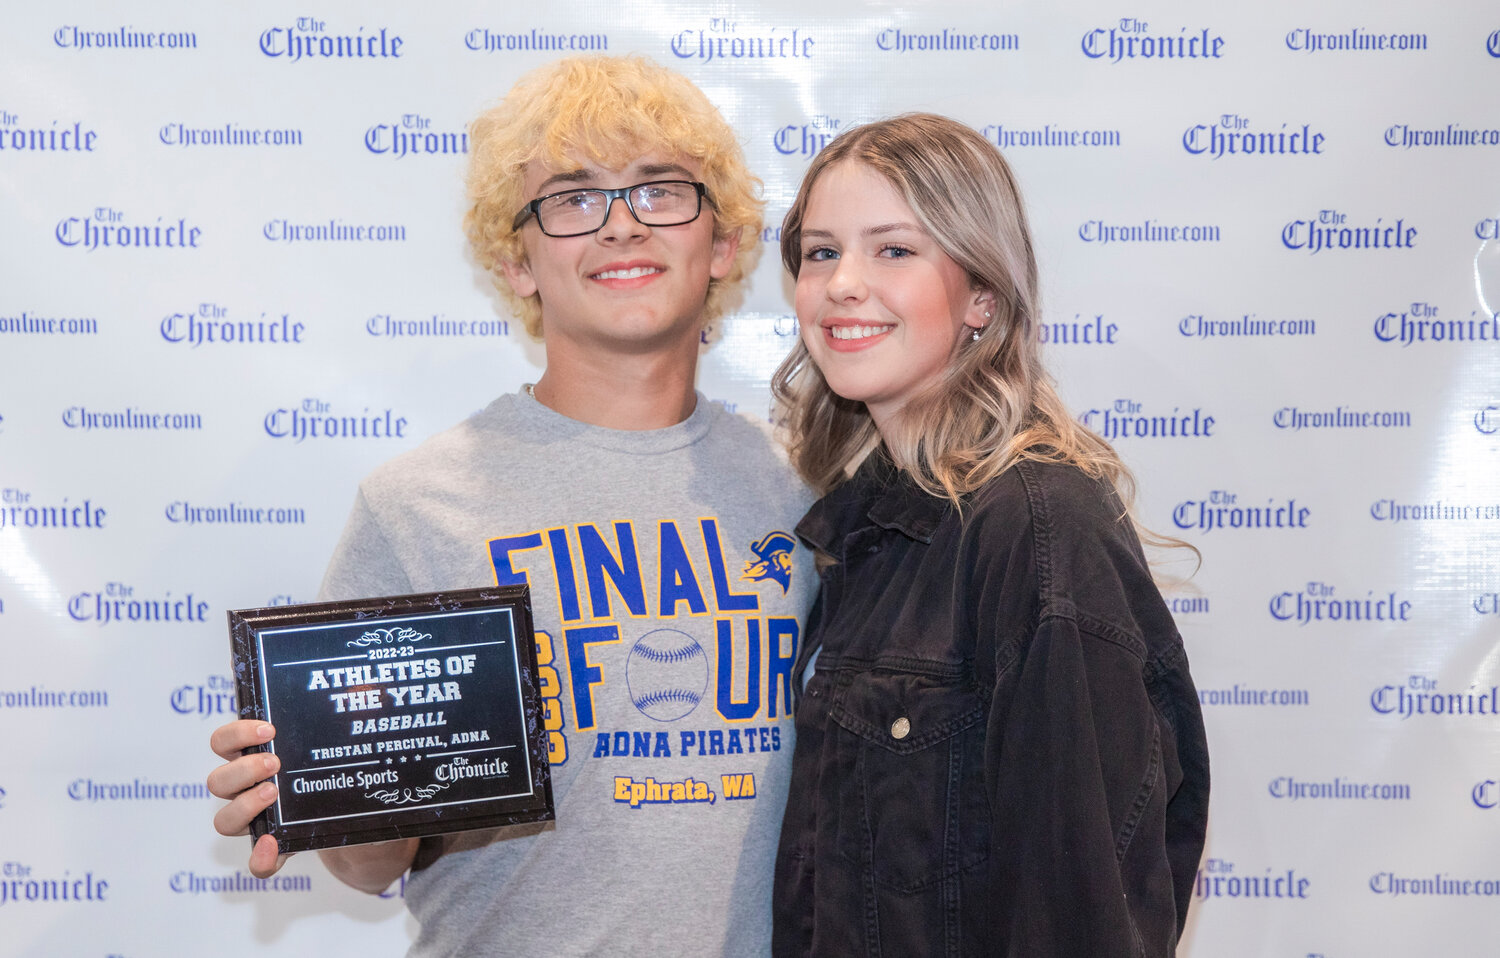 Adna’s baseball MVP Tristan Percival smiles for a photo with Emerson Nelson Tuesday evening during the “Athletes of the Year” banquet at the Jester Auto Museum. Adna’s ace on the hill got better as the spring went on, leading the Pirates to two wins in the district tournament with two near-complete games that saw him surrender just three total hits. Then, Percival one-upped himself in the first round of the State tournament, coming an out shy of a no-hitter against Cle Elum-Roslyn in a 17-strikeout performance.